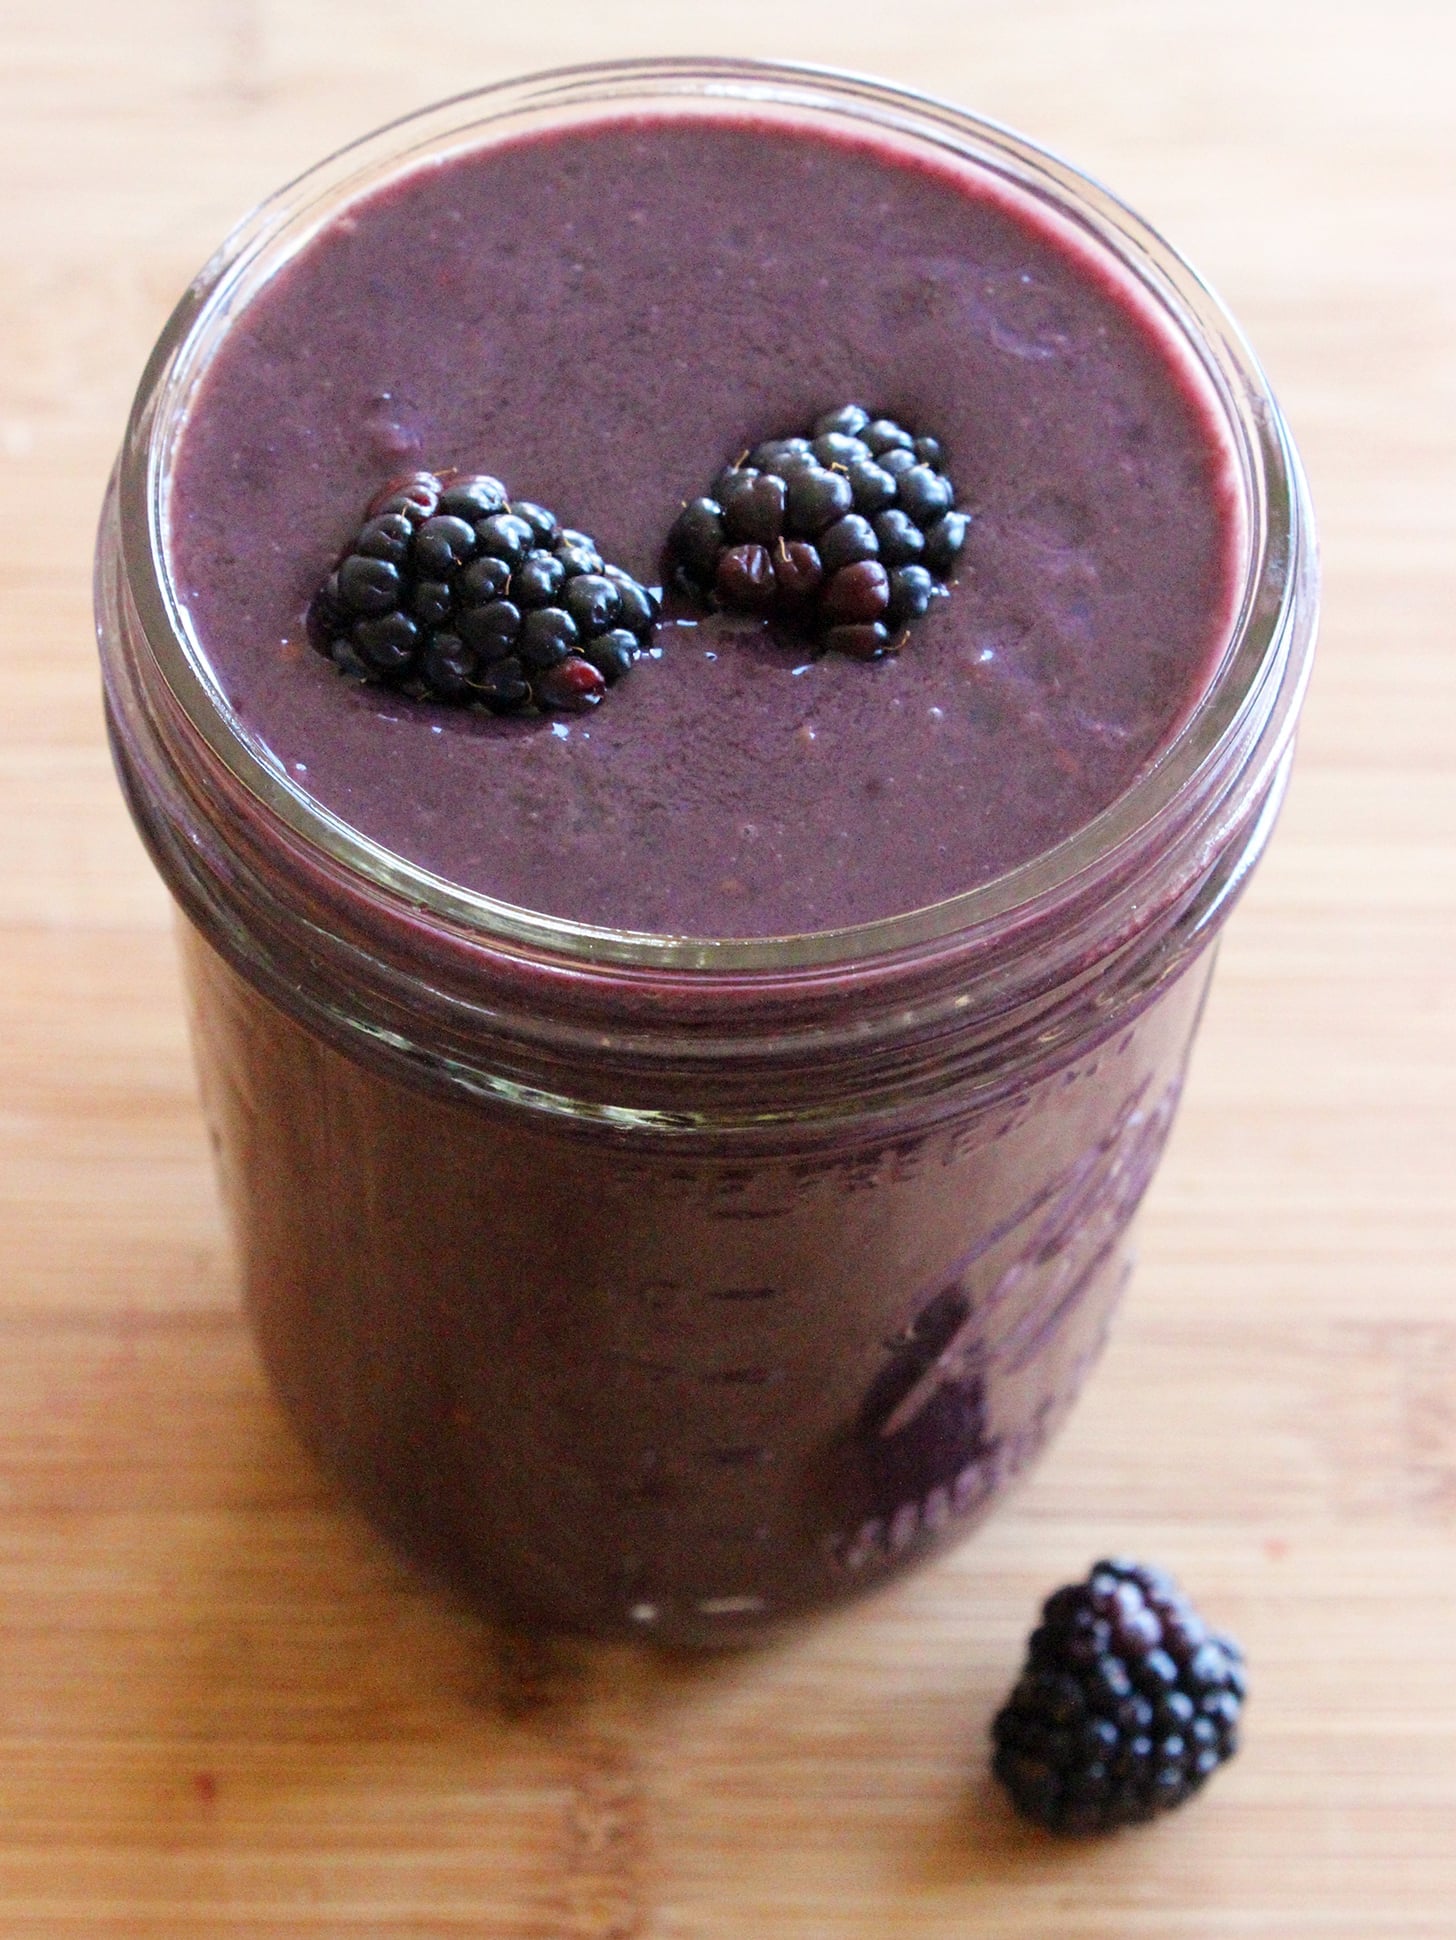 Karlie Kloss's Breakfast Smoothie | 13 Delicious Blueberry Recipes to Keep  You Healthy and Full | POPSUGAR Fitness Photo 10